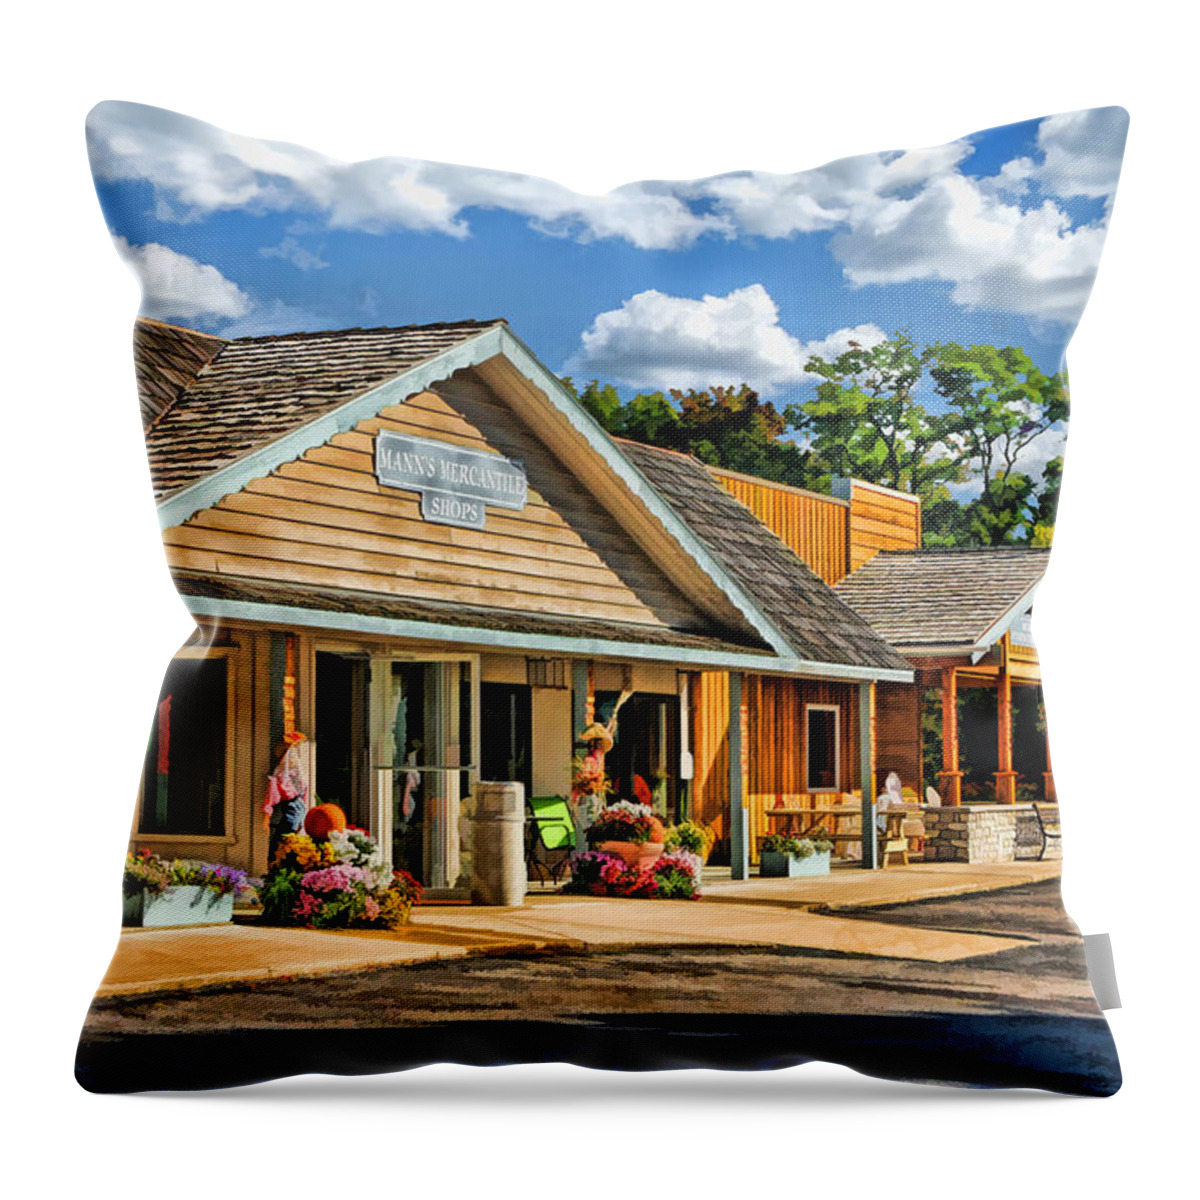 Door County Throw Pillow featuring the painting Mann's Mercantile Shops on Washington Island Door County by Christopher Arndt